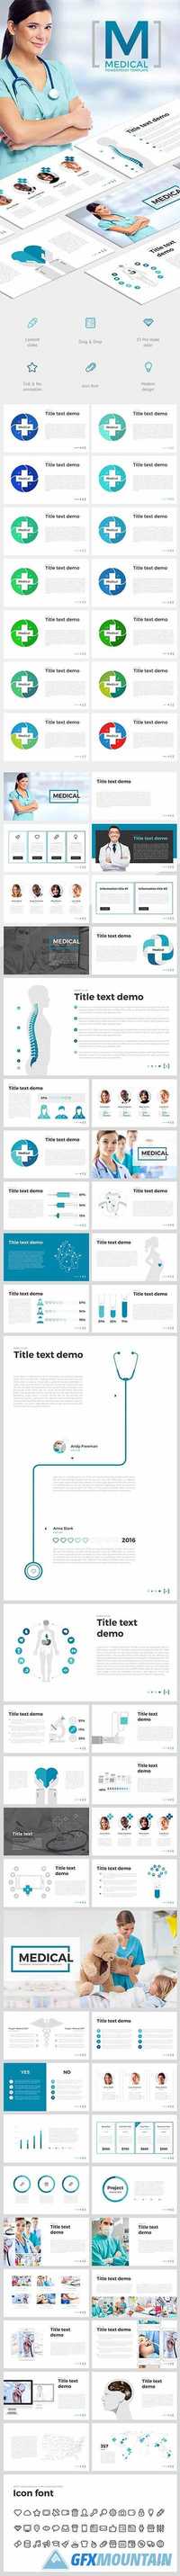 Medical PowerPoint 15999384